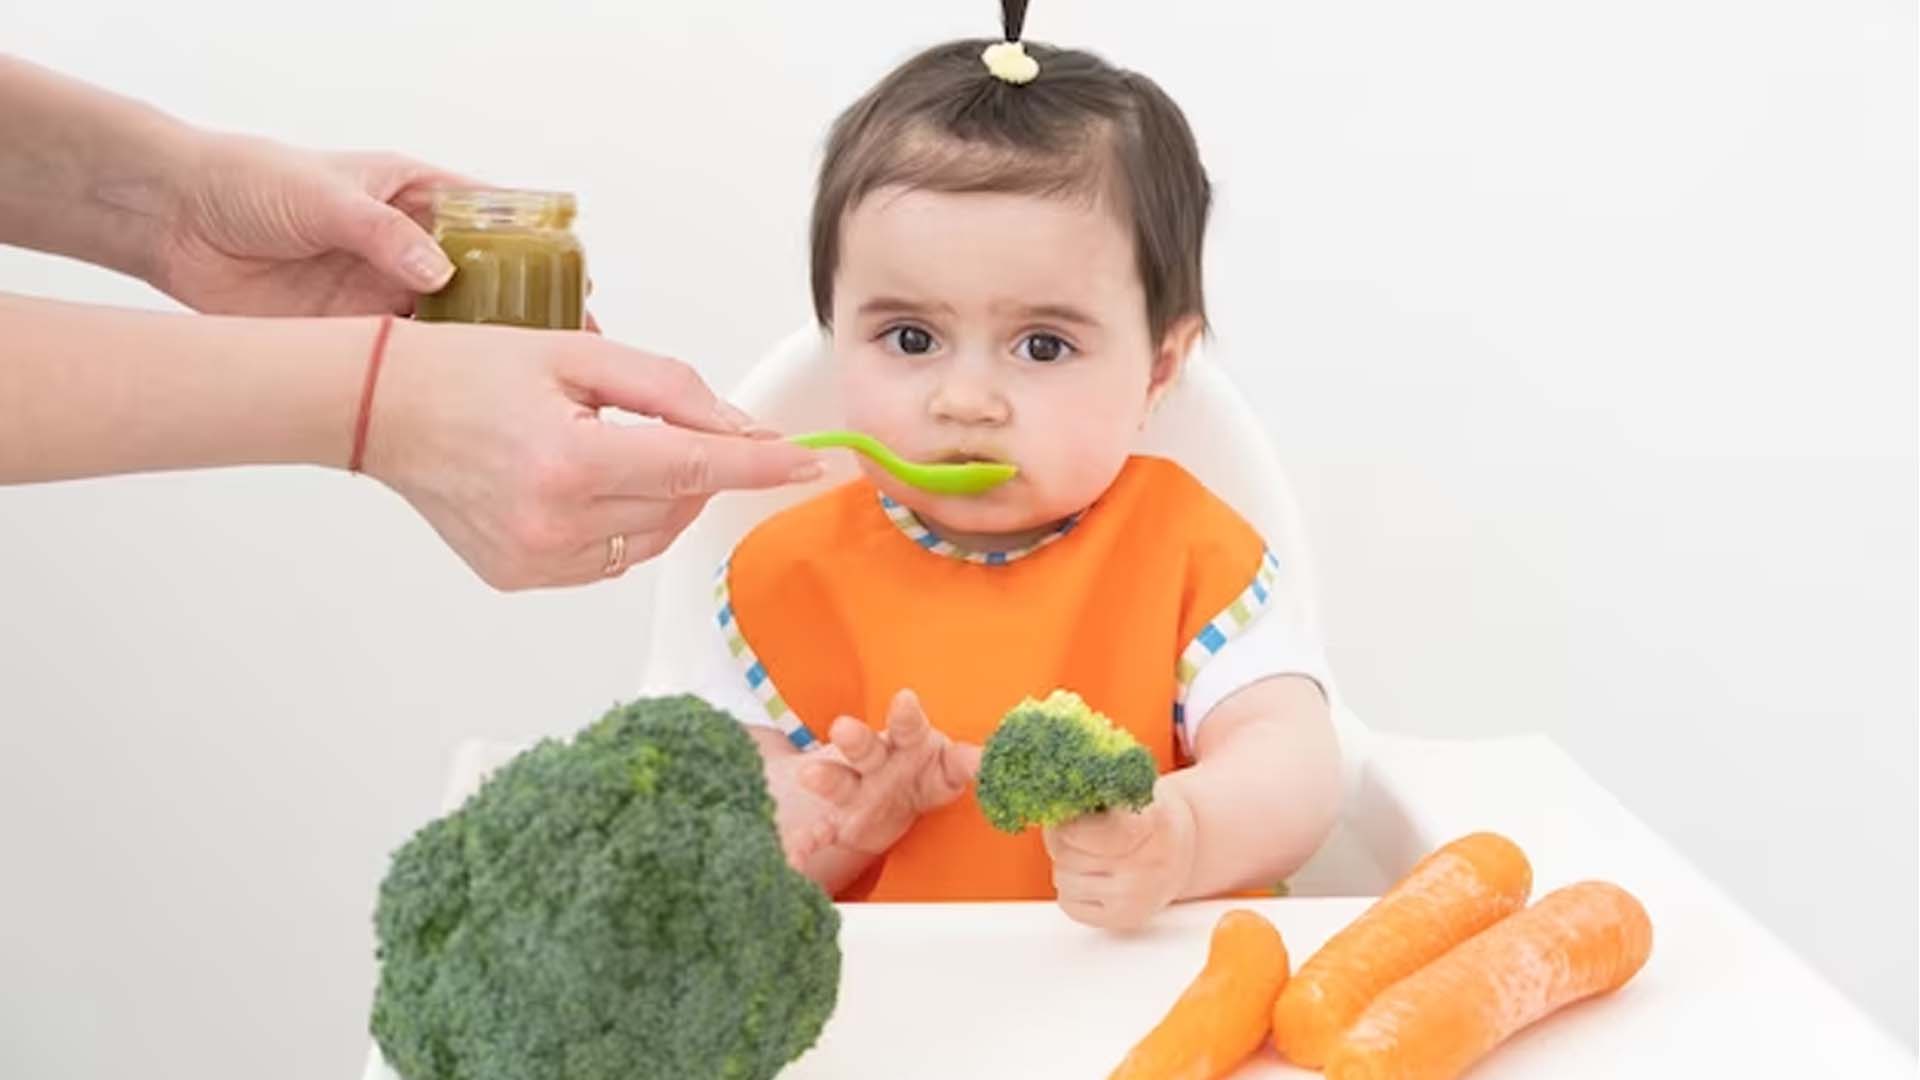 Nutritional Requirements for 2-3 Year Old's